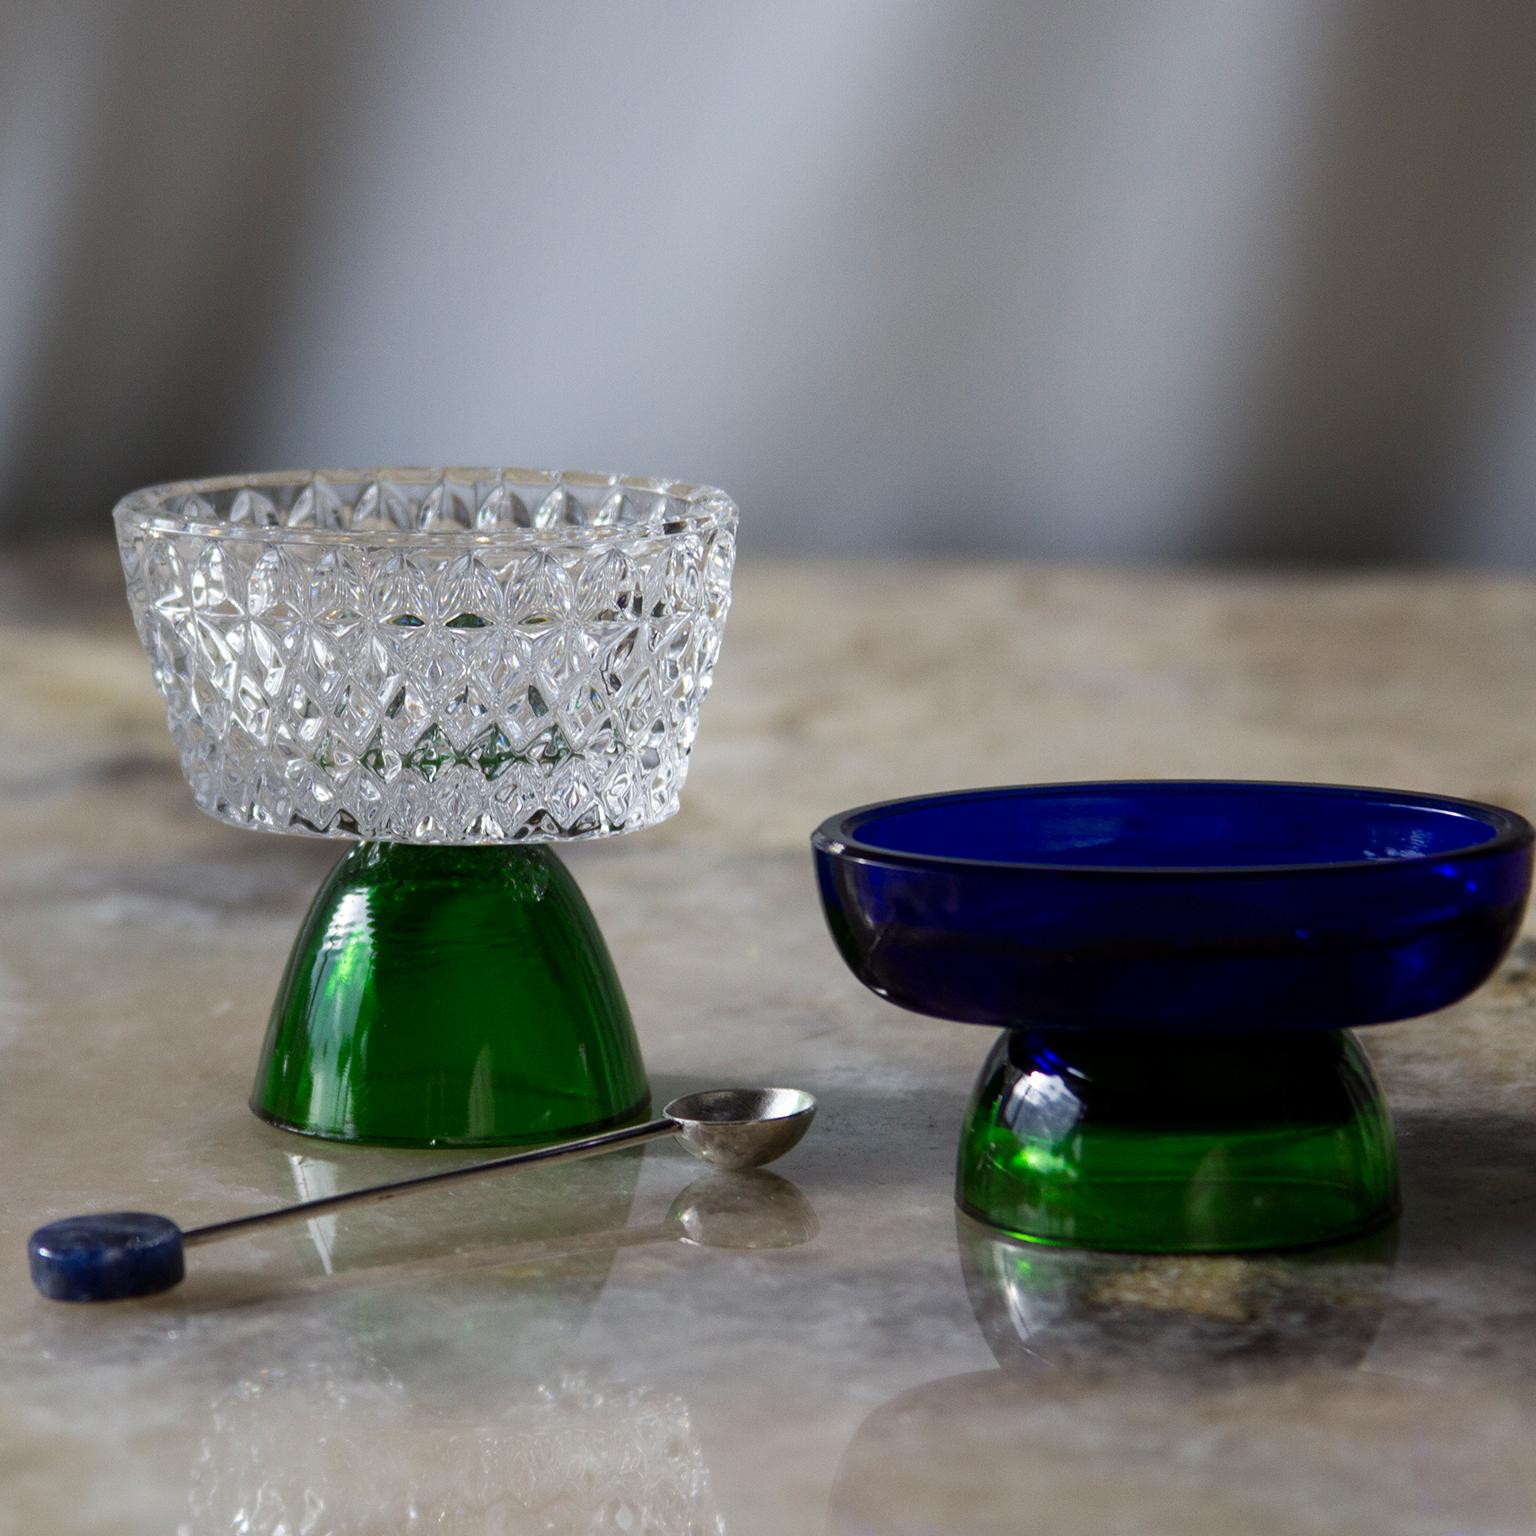 Salt cellars are part of the collection Ambar launched in 2019. A serie of different delicate salt or condiments containers in different sizes. Each container comes with a small silver spoon.
This series of blown-glass wares was created by a Tuscan